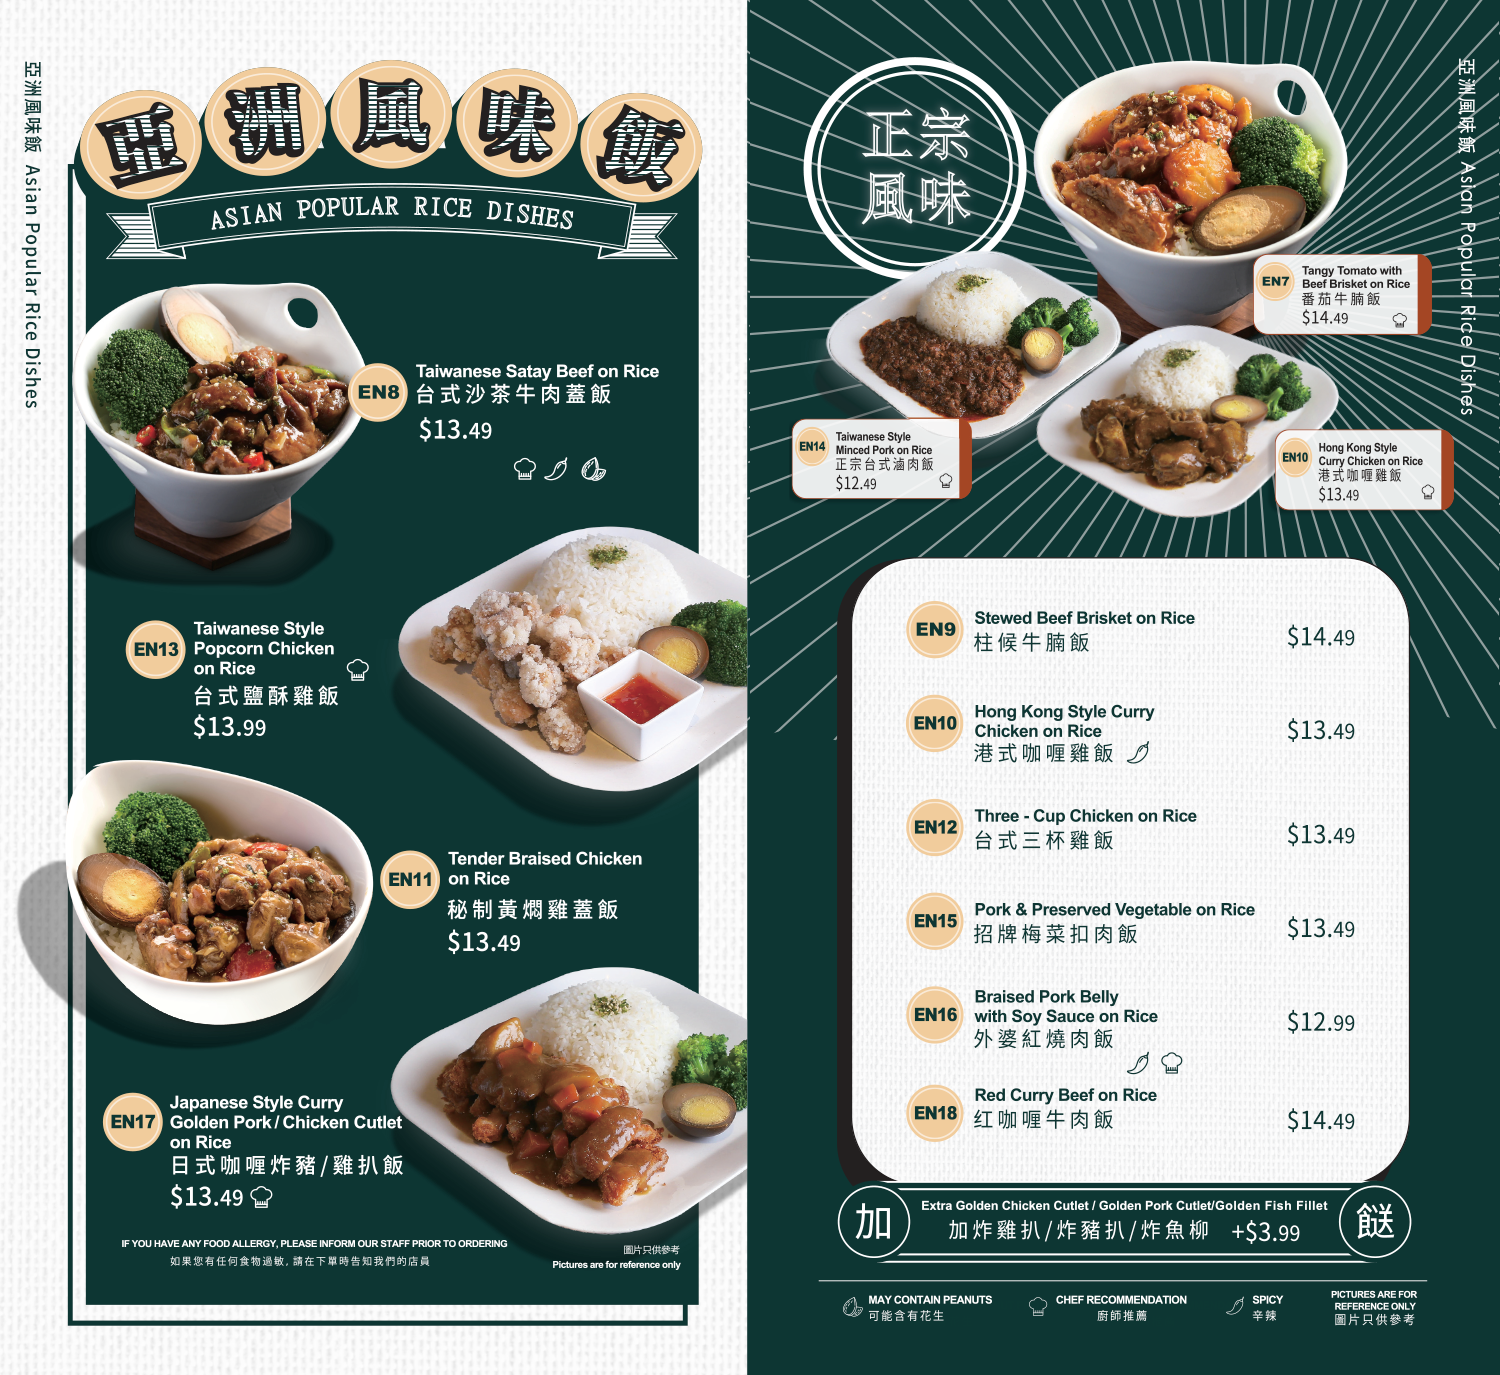 Menu Page Asian Popular Rice dishes